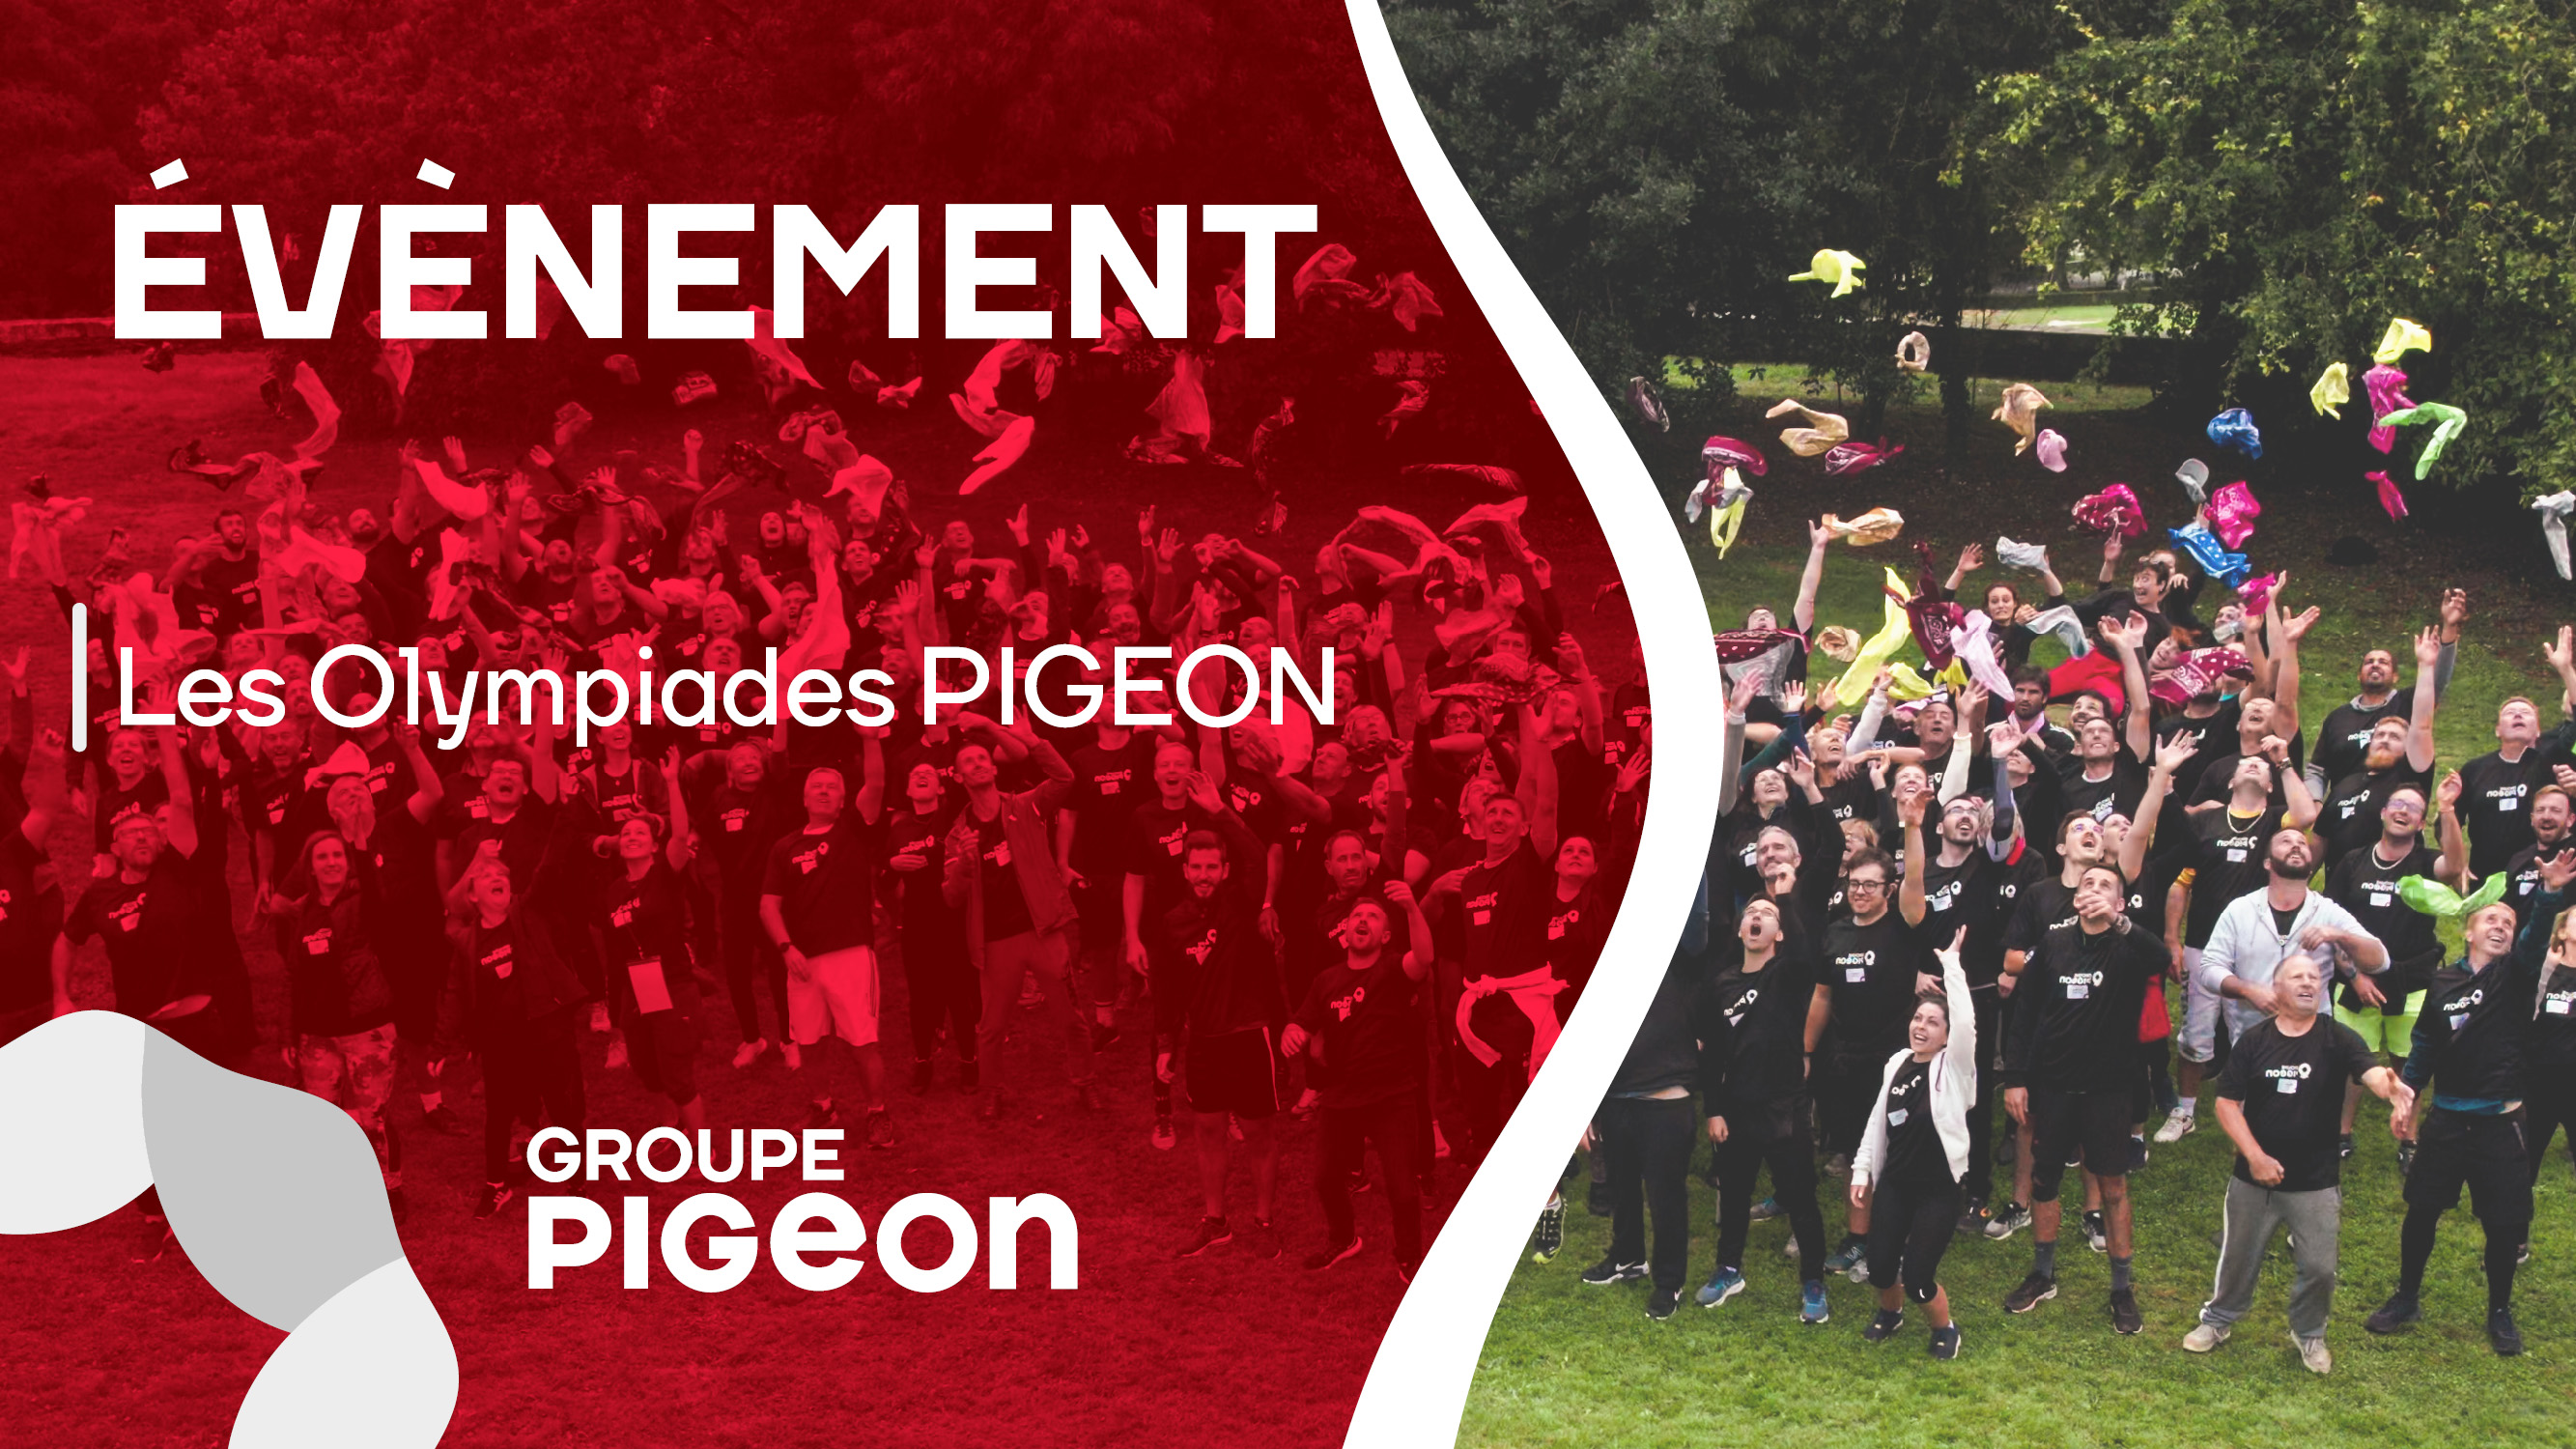 Les Olympiades du Groupe PIGEON